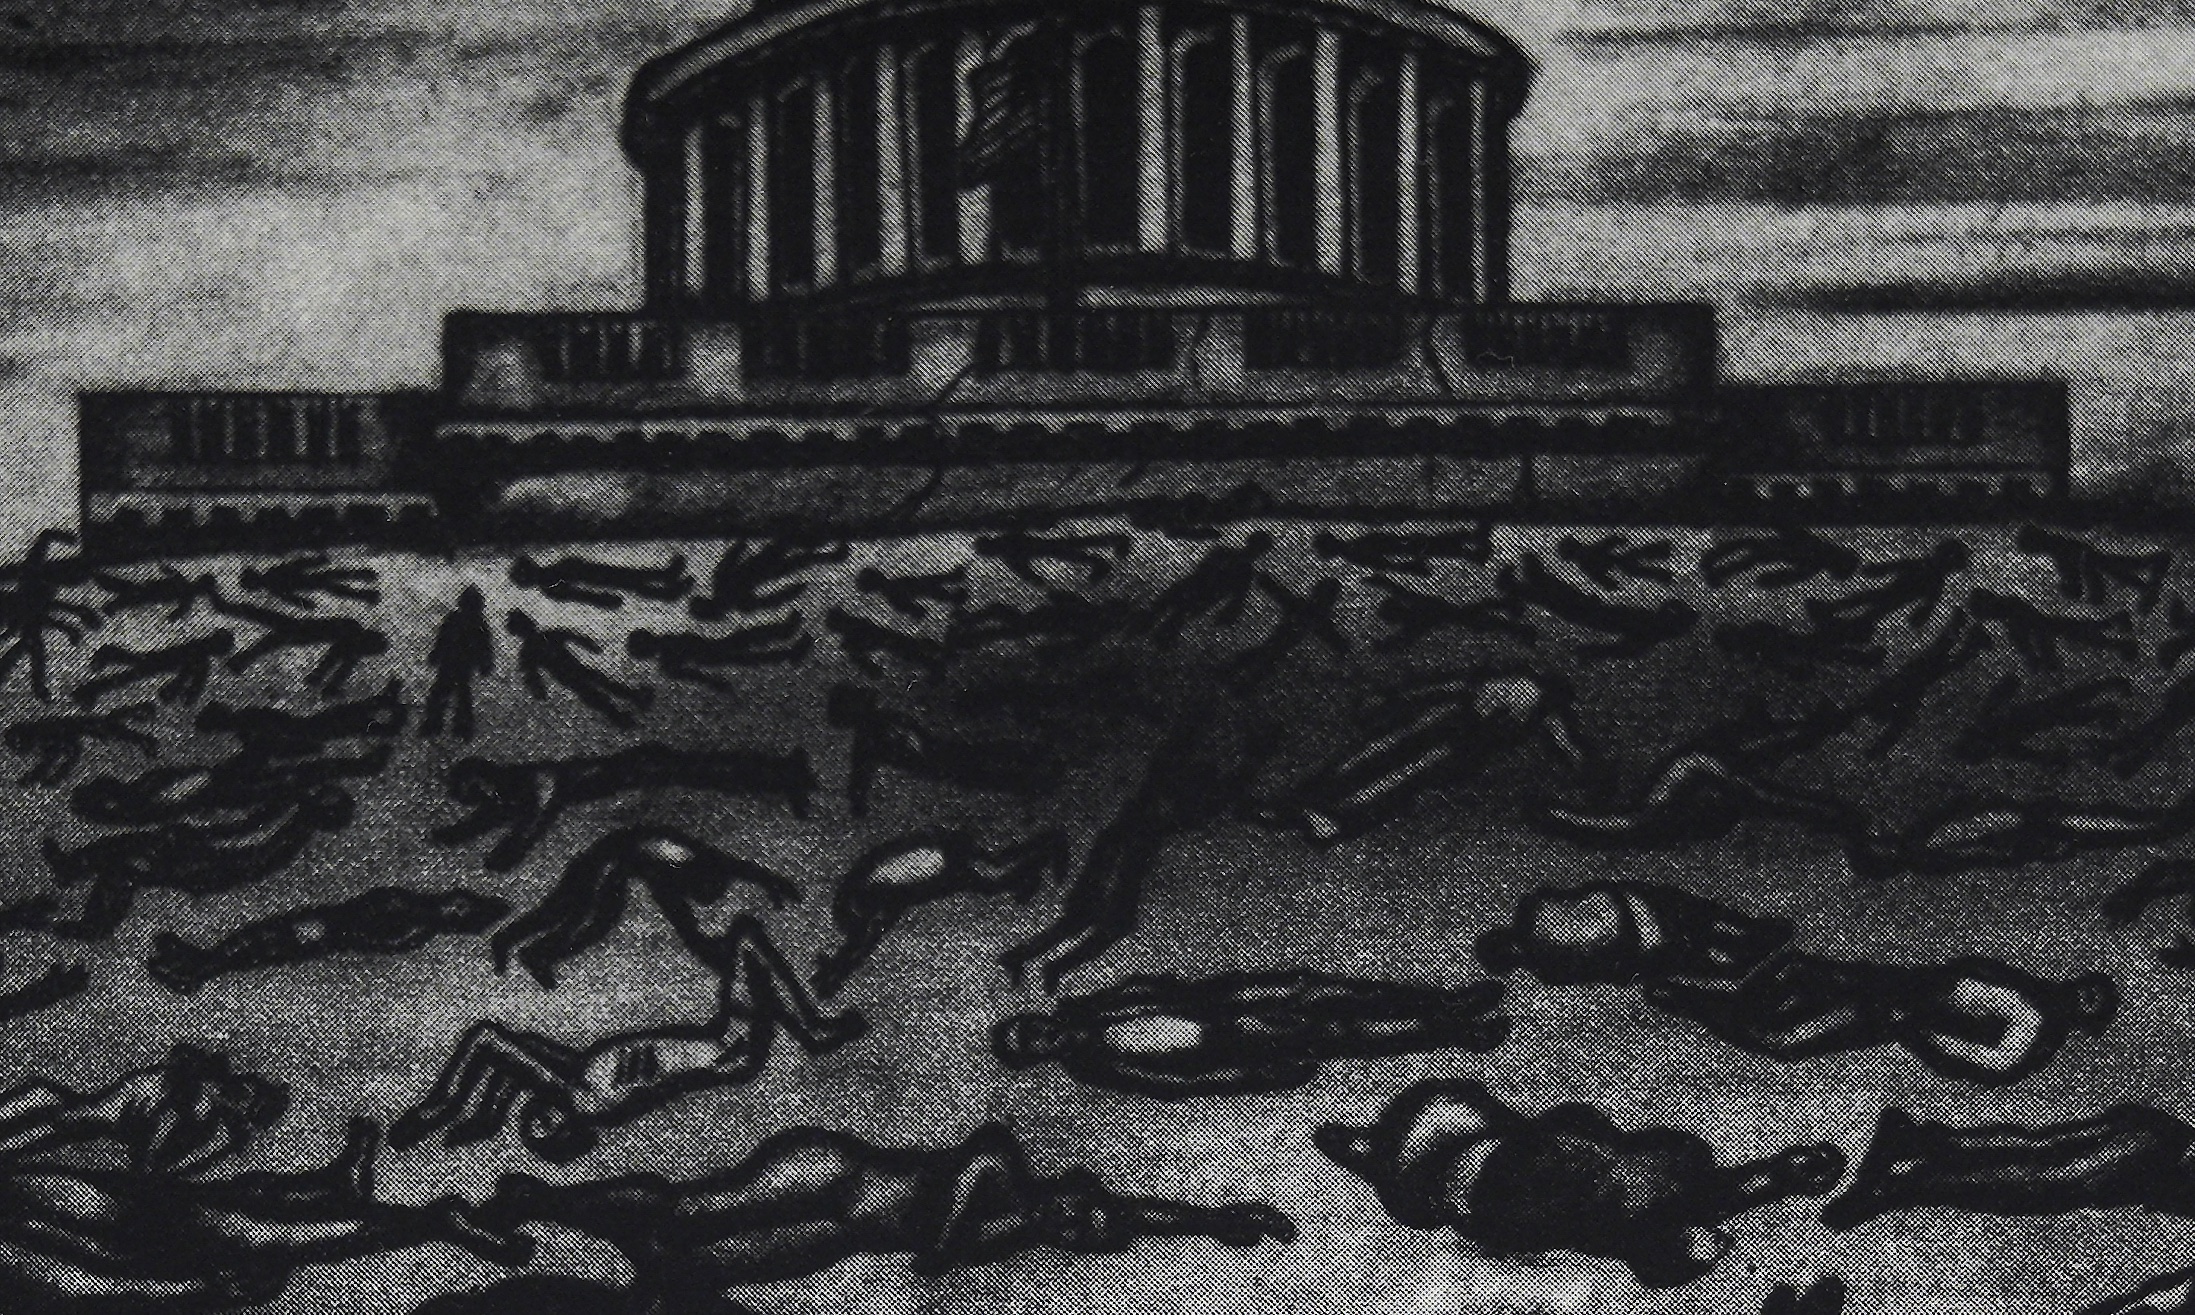 Thumbnail - Sue Coe, Aids won't wait, the enemy is here not in Kuwait, 1990, photo-etching on paper, 23.8 x 32.5 cm (Pennsylvania Academy of the Fine Arts, © Sue Coe)